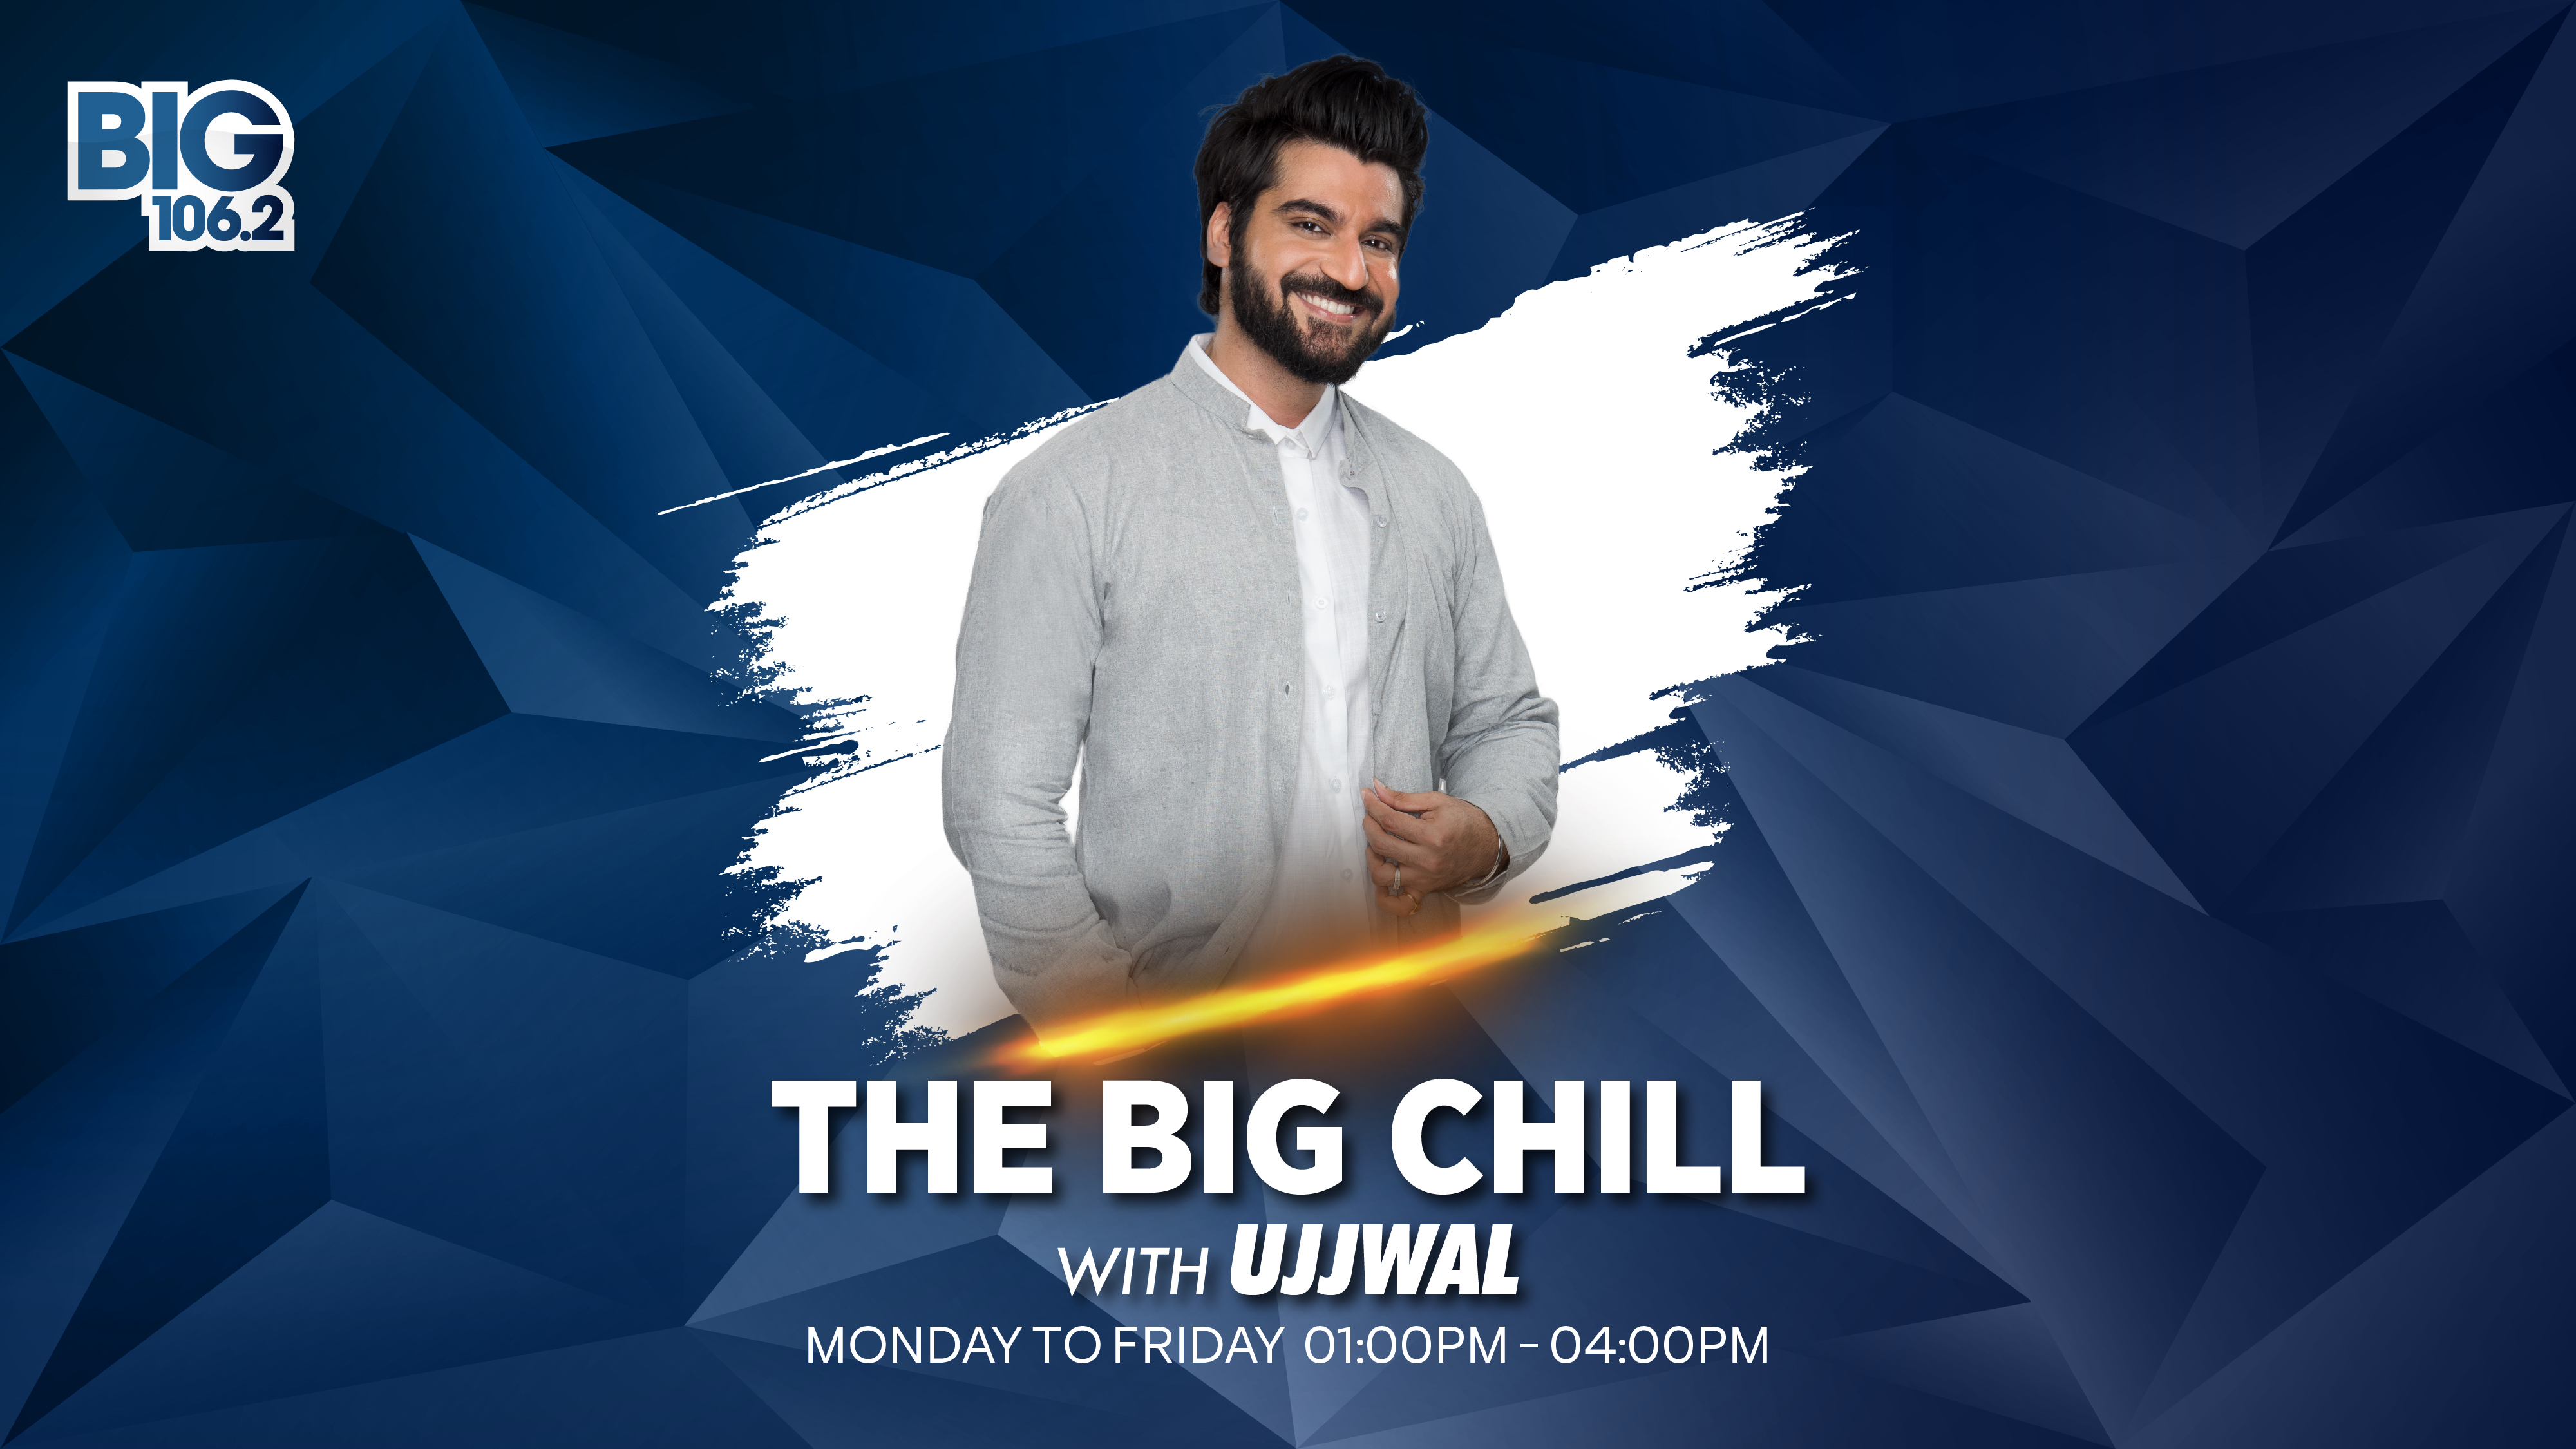 The Big Chill Show - FRIDAY